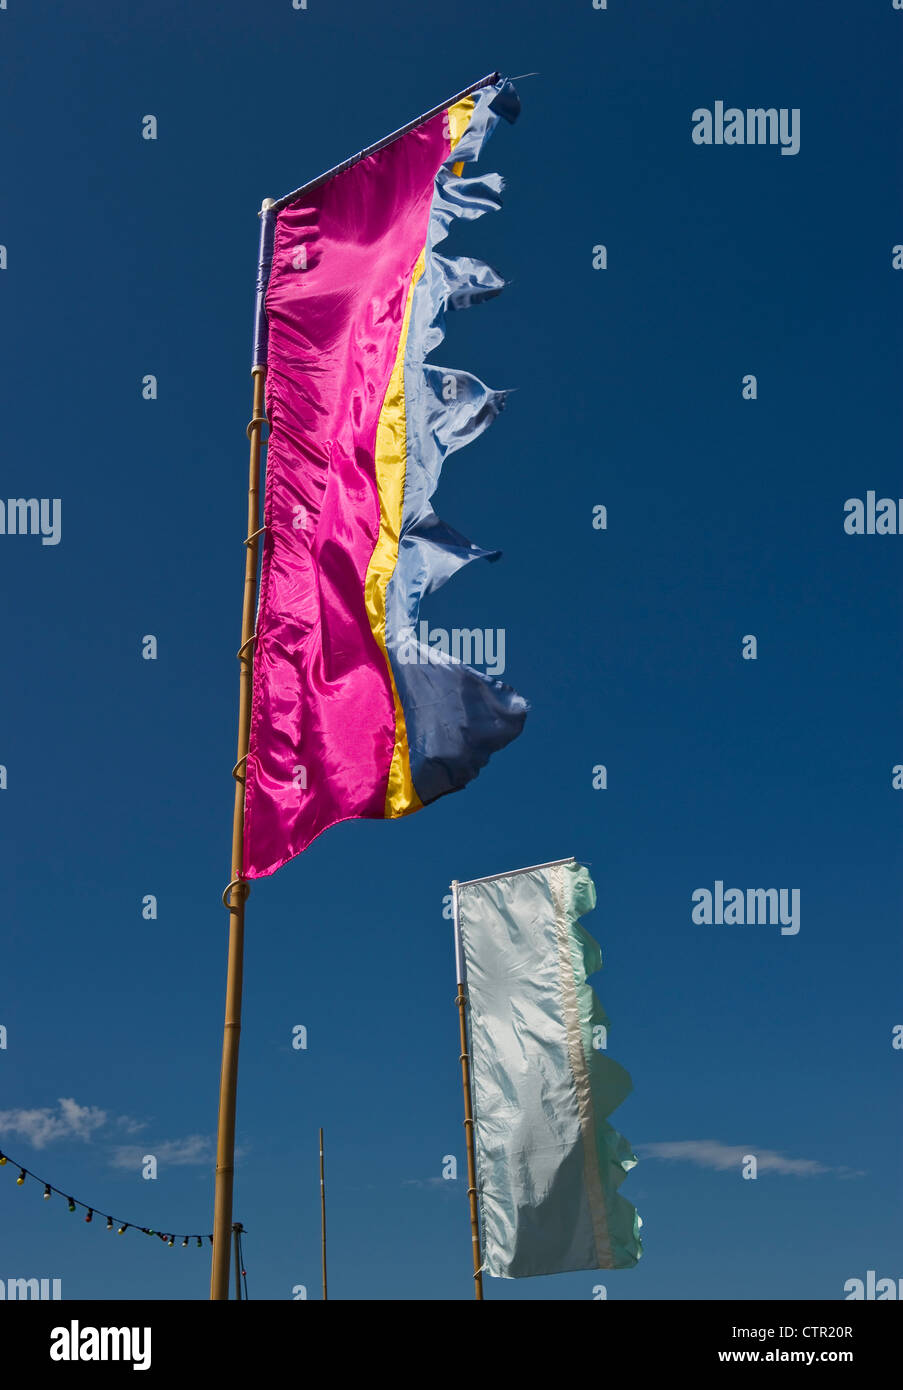 Colourful flags flying against a blue sky at a music festival in the UK, in summertime Stock Photo